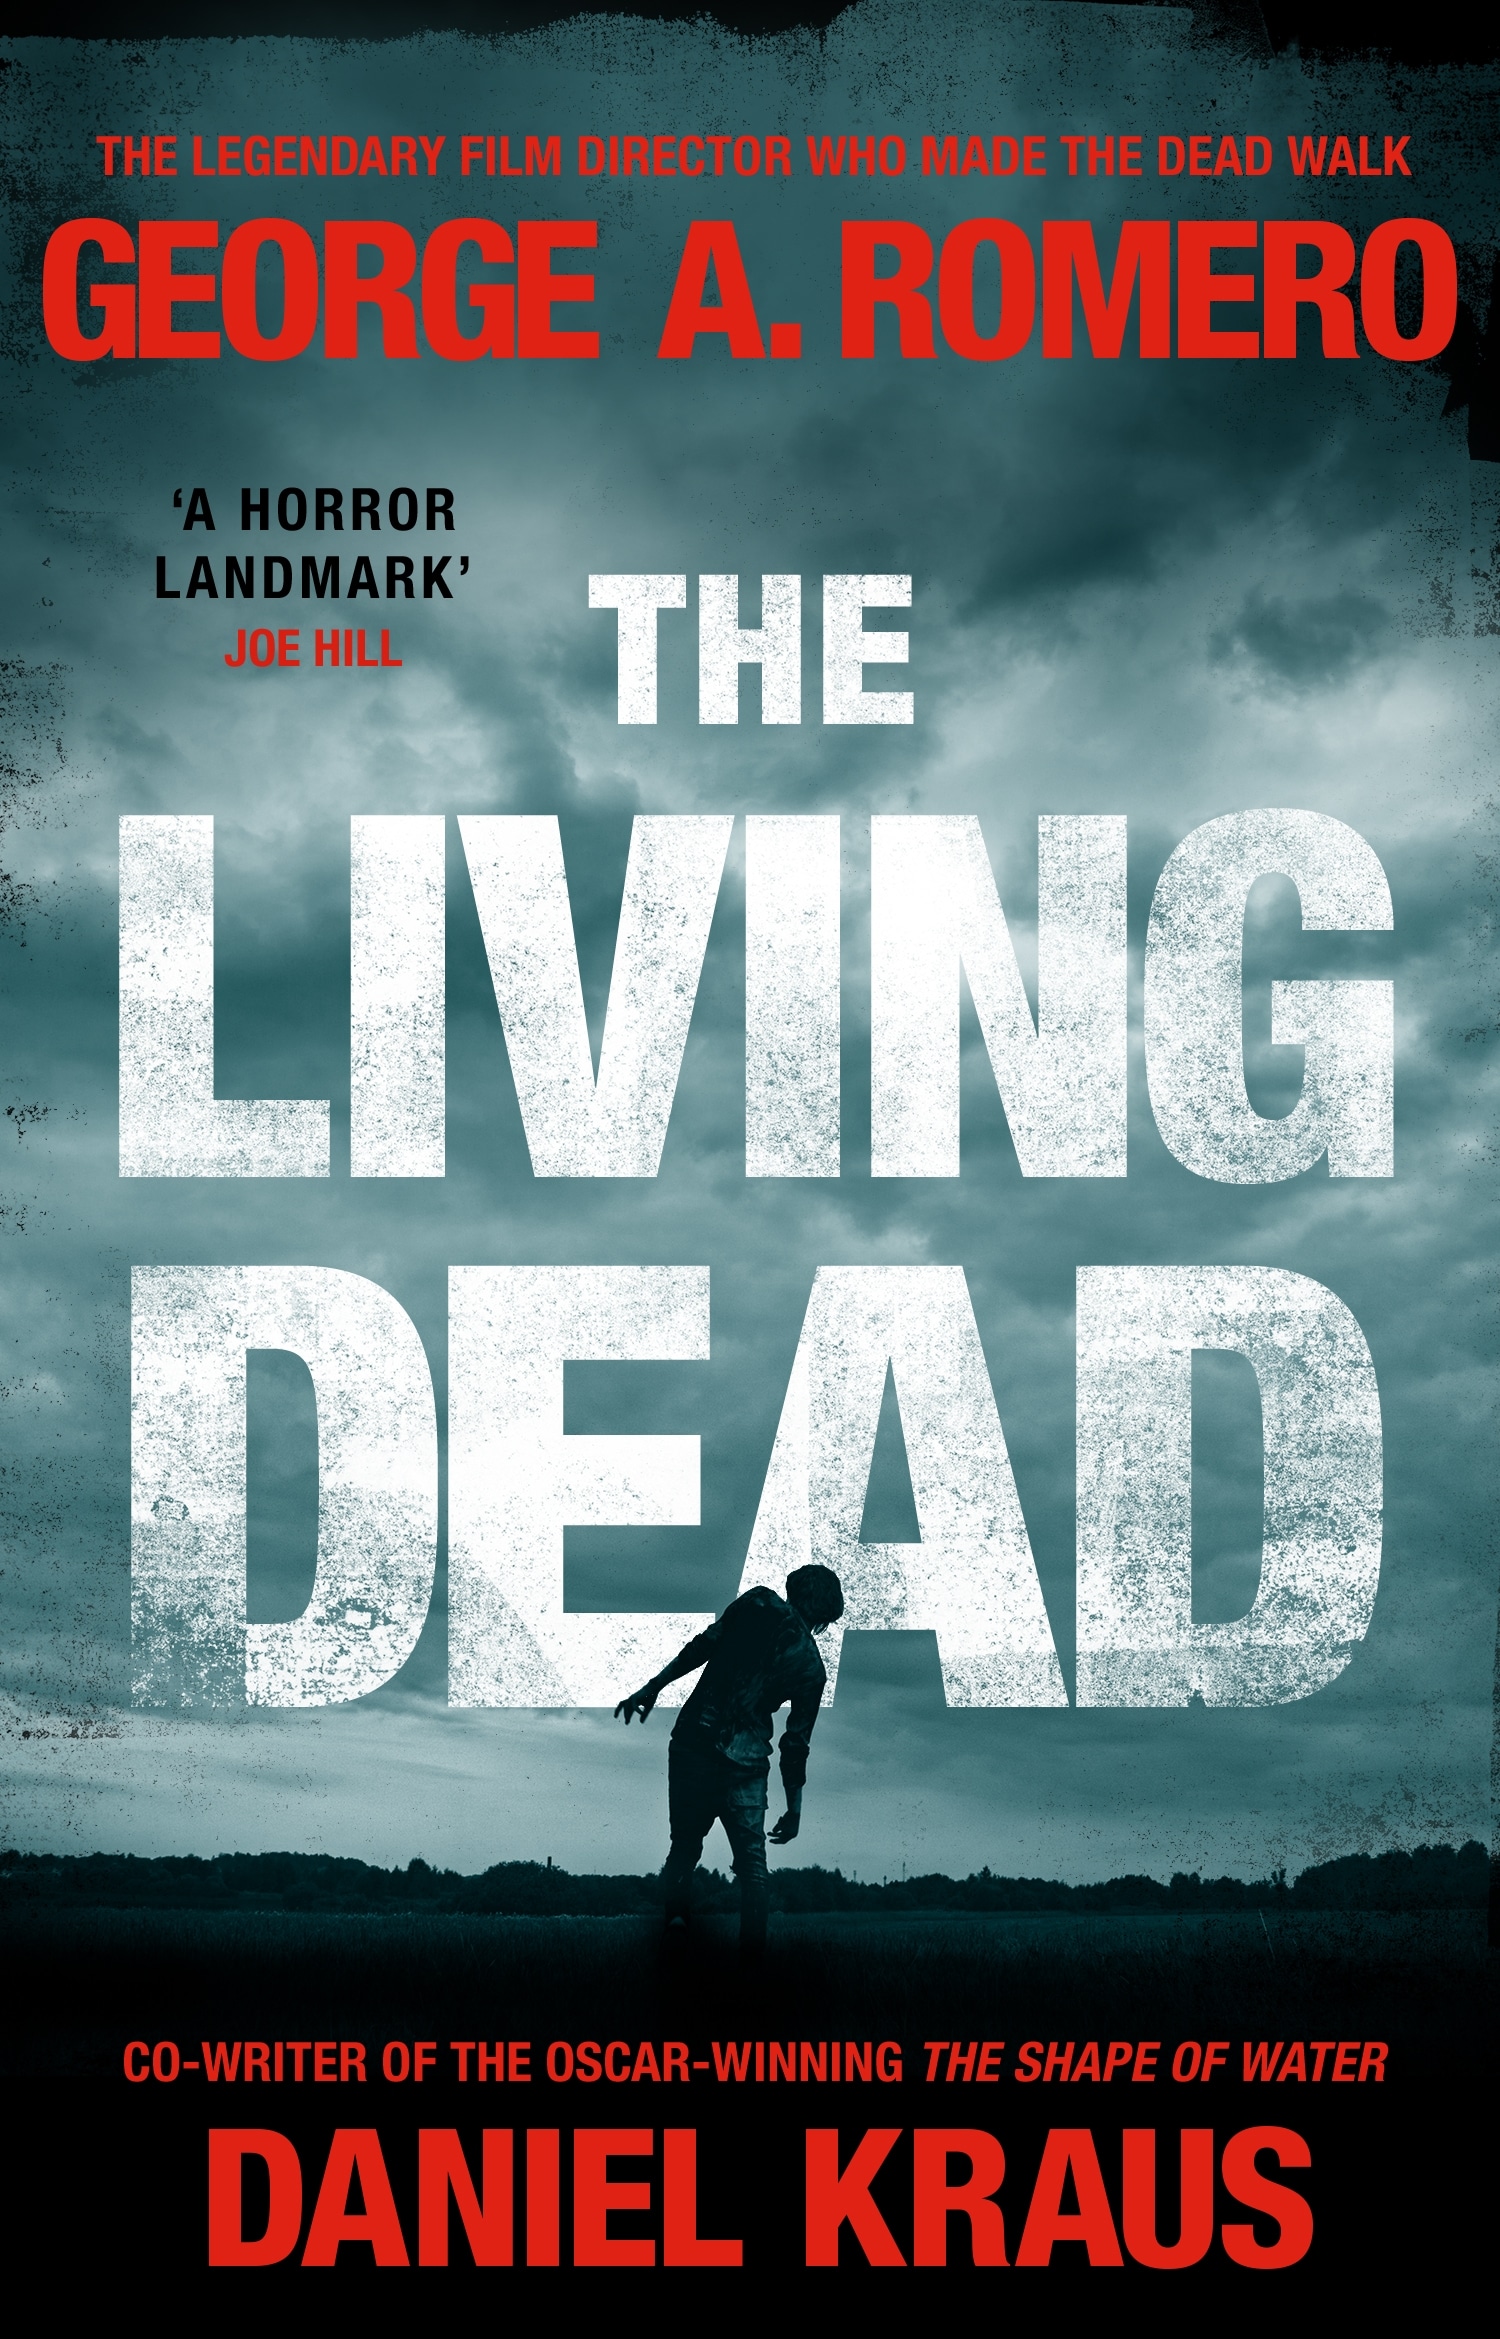 Book “The Living Dead” by George A. Romero, Daniel Kraus — October 14, 2021